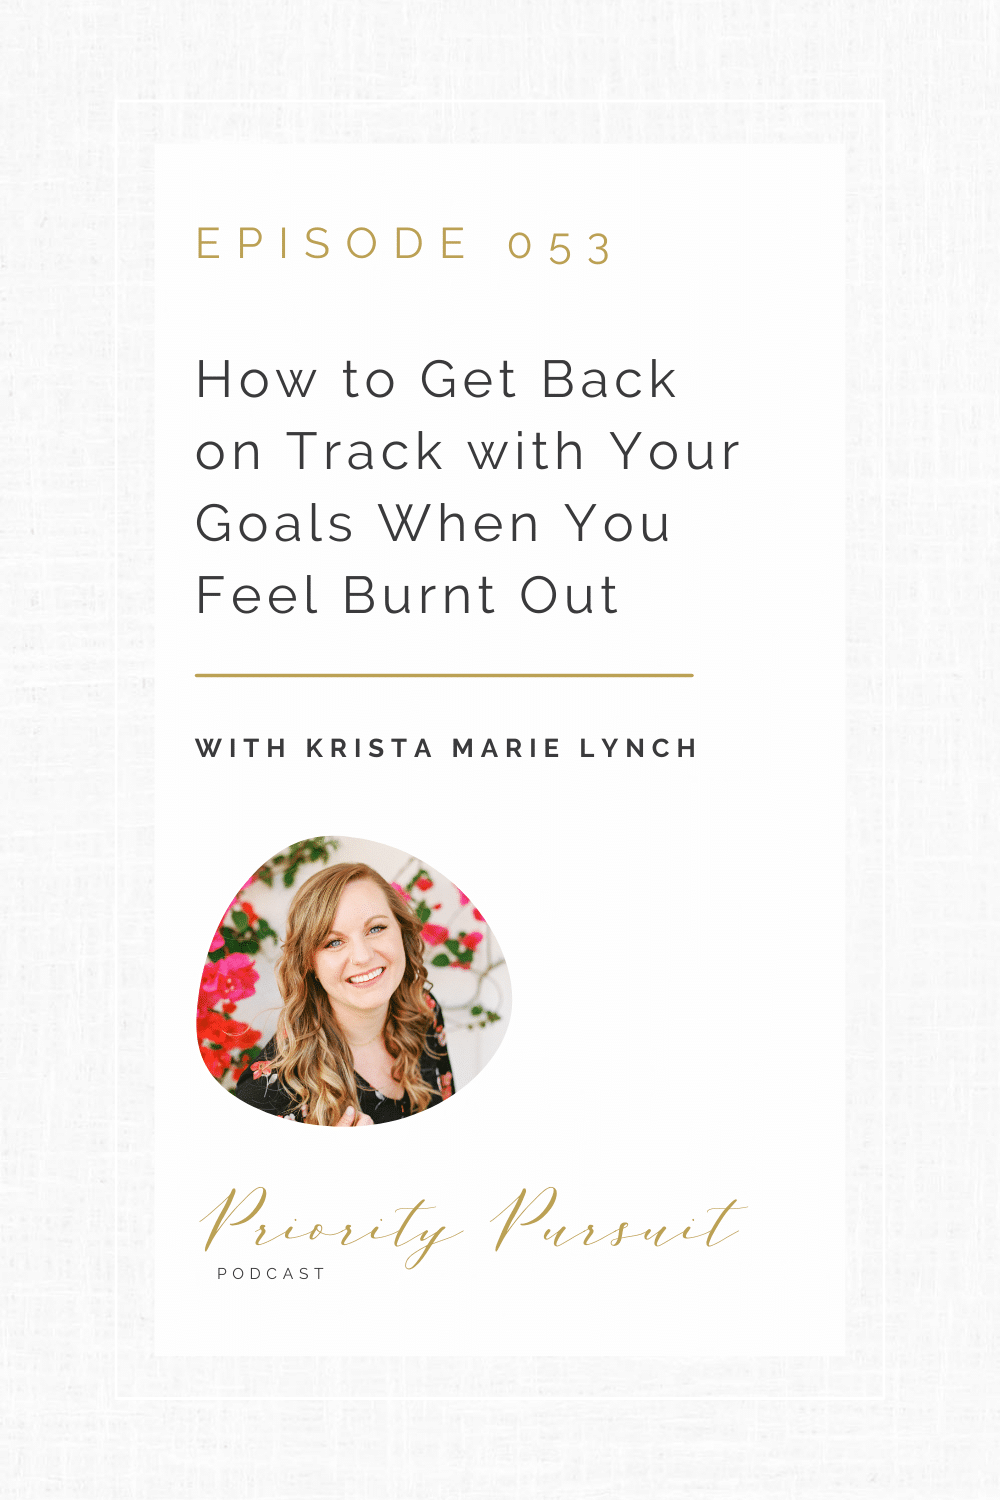 Victoria Rayburn and Krista Marie Lynch discuss how to get back on track with your goals when you feel burnt out